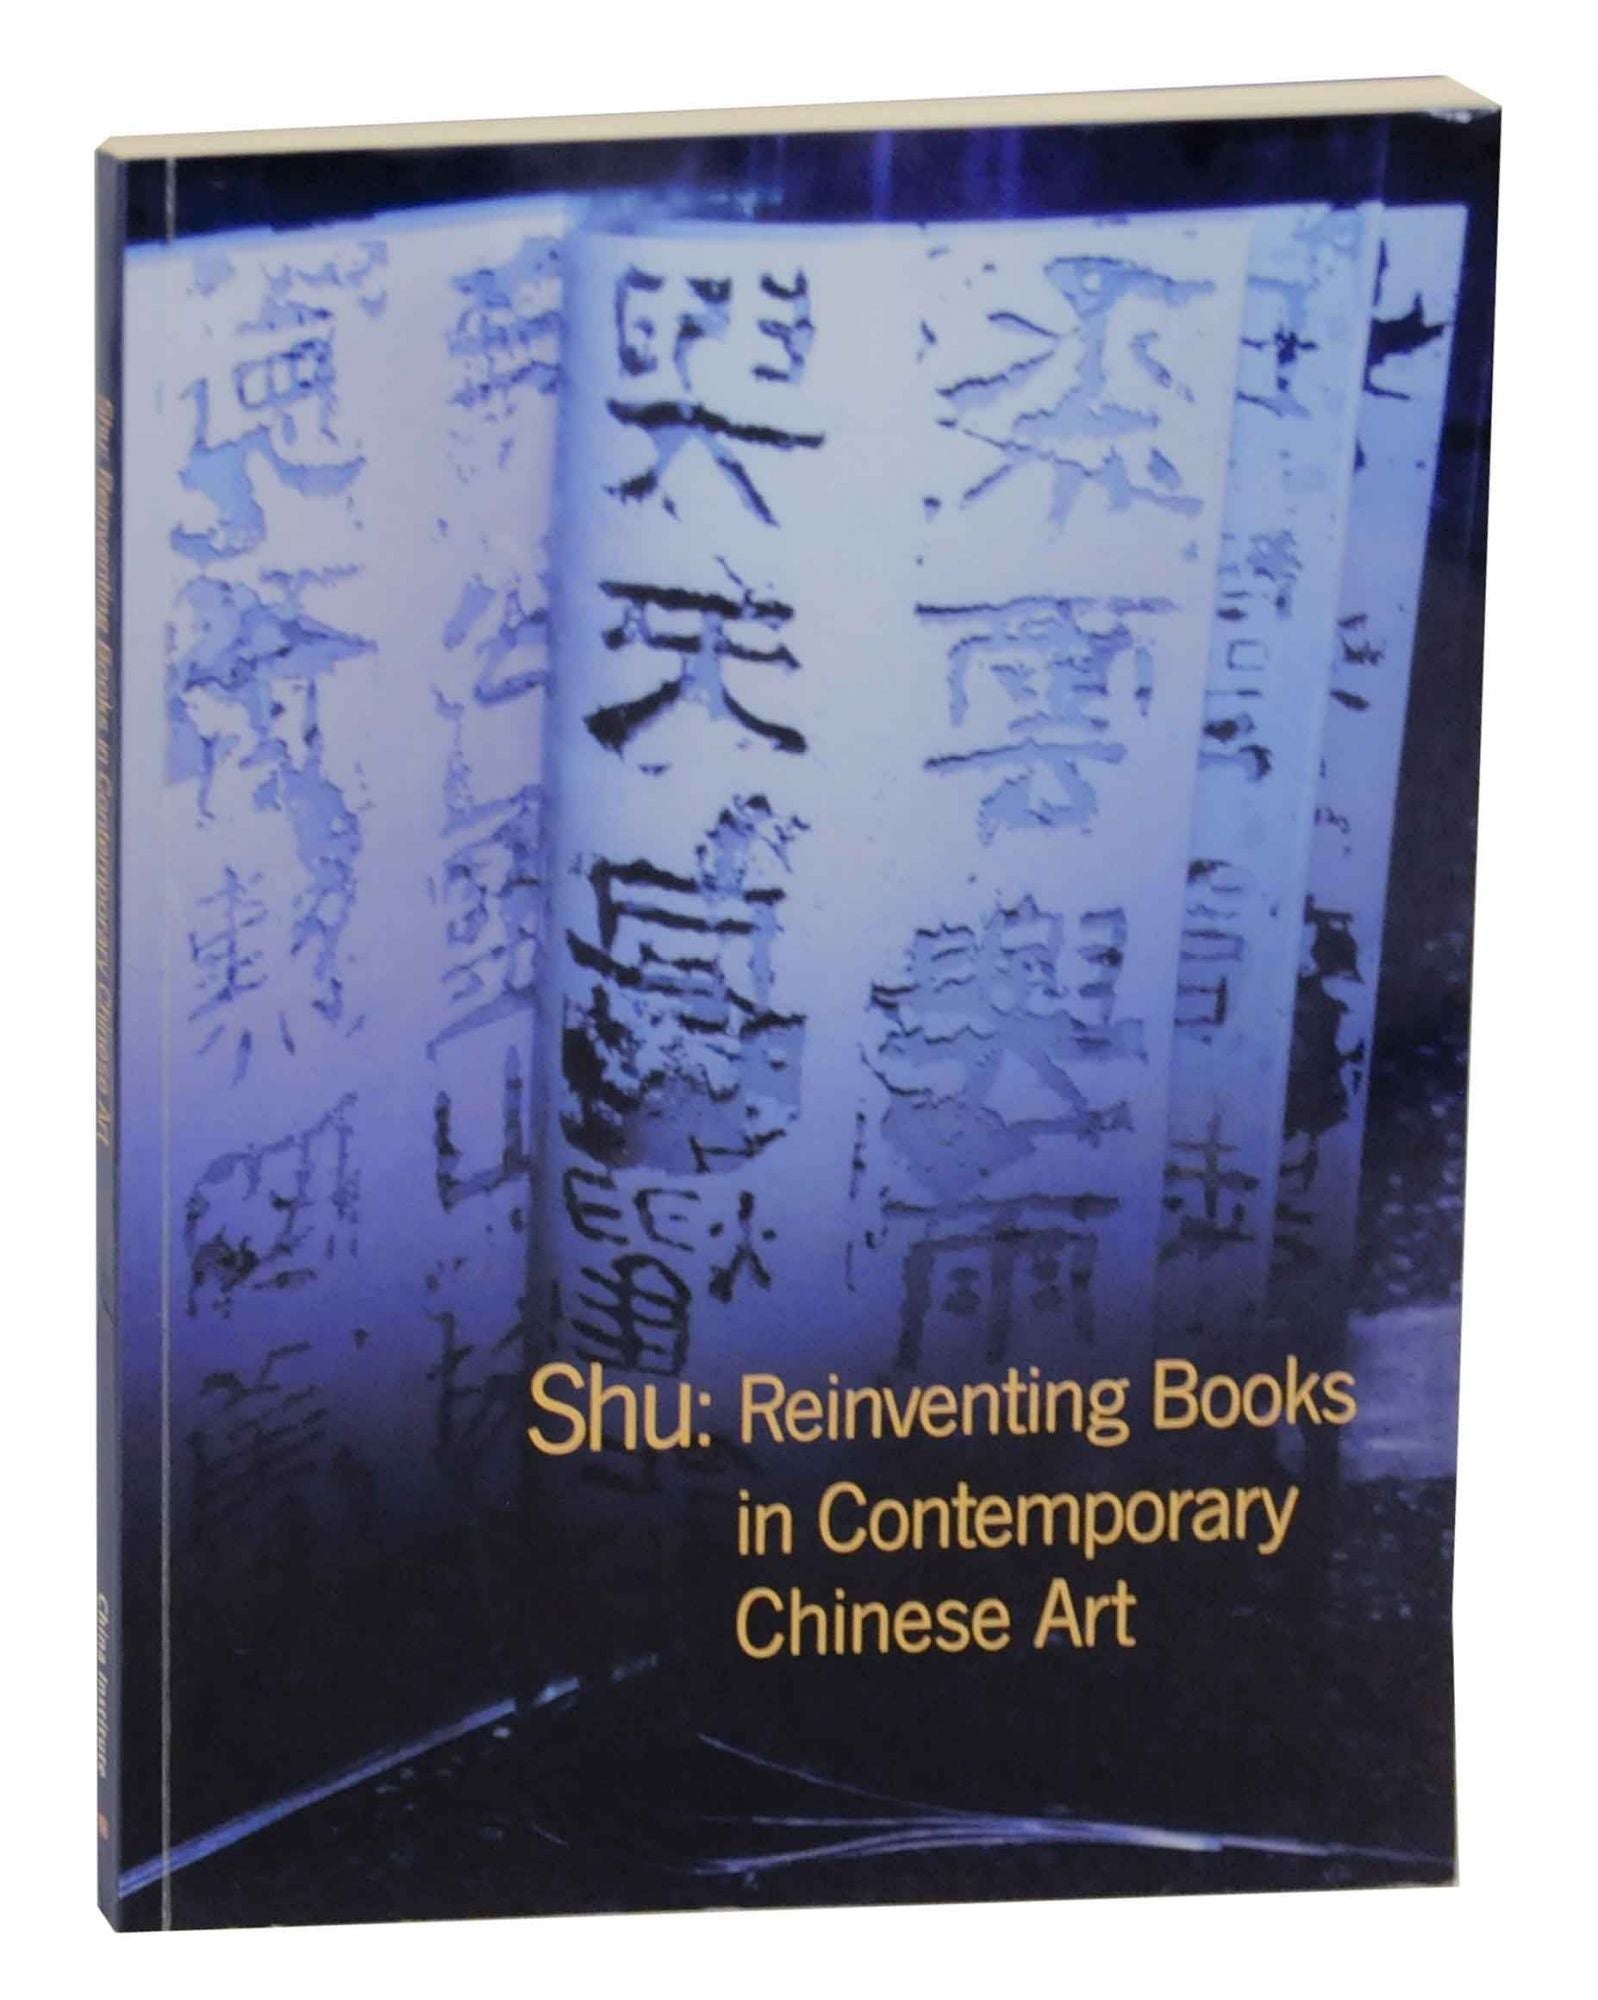 Shu: Reinventing Books in Contemporary Chinese Art by Wu HUNG, Peggy Wang  on Jeff Hirsch Books